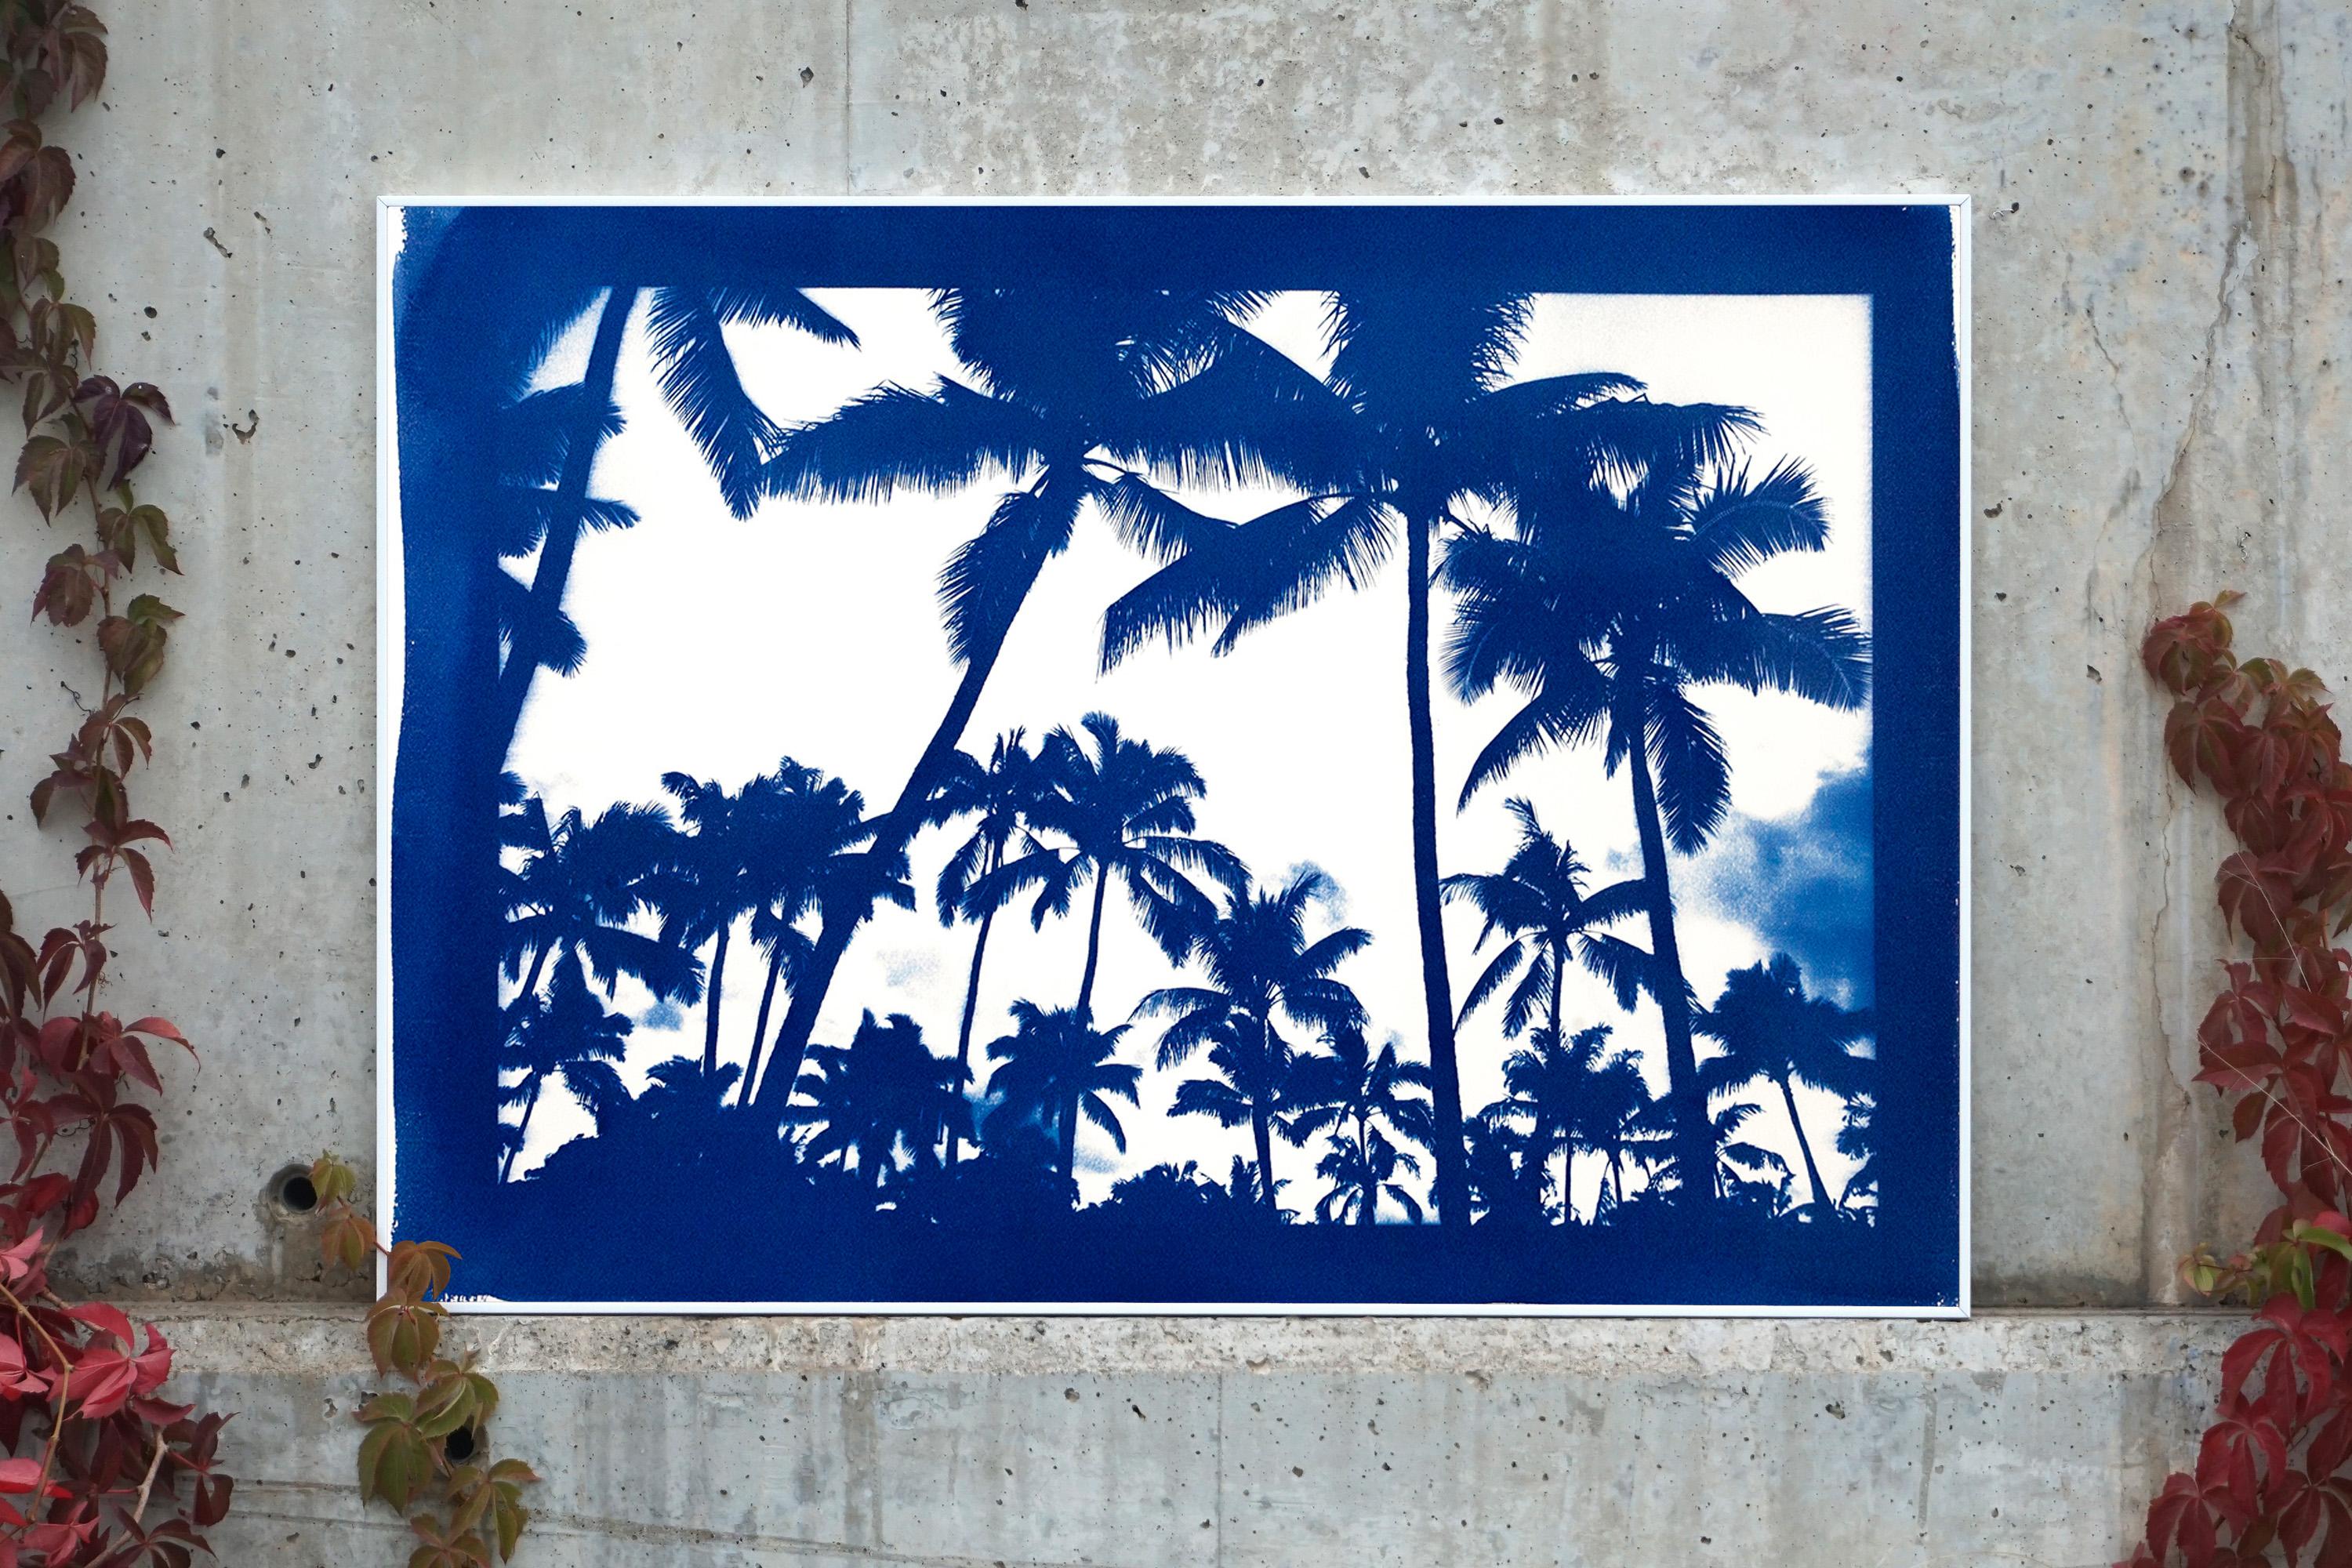 Acapulco Palm Sunset, Blue Border, Cyanotype on Watercolor Paper, 100x70cm - Contemporary Print by Kind of Cyan